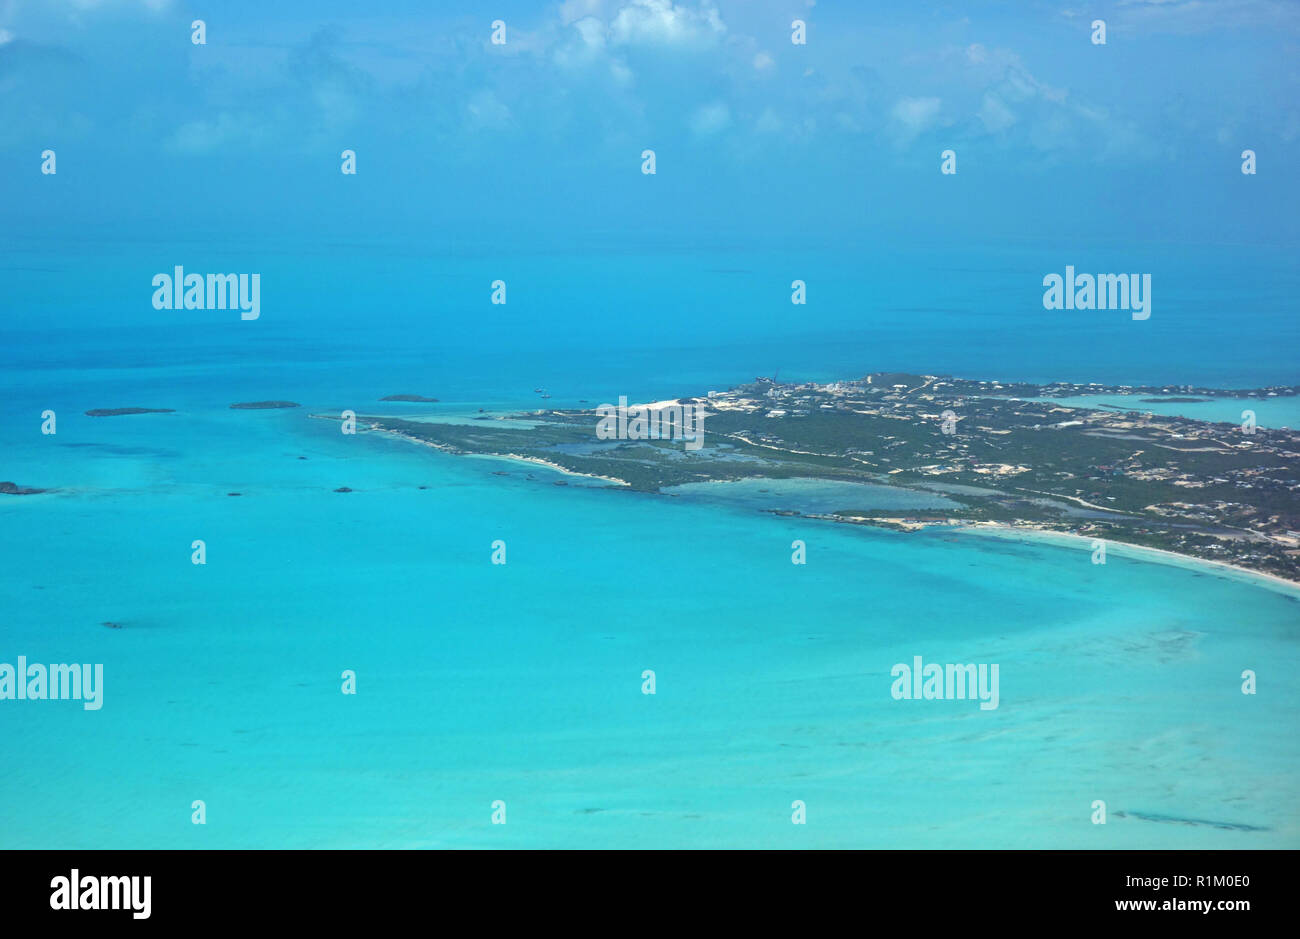 PROVIDENCIALES, TURKS AND CAICOS -8 JUL 2017- Aerial view of the island of Providenciales (Provo) in the Turks and Caicos. Stock Photo